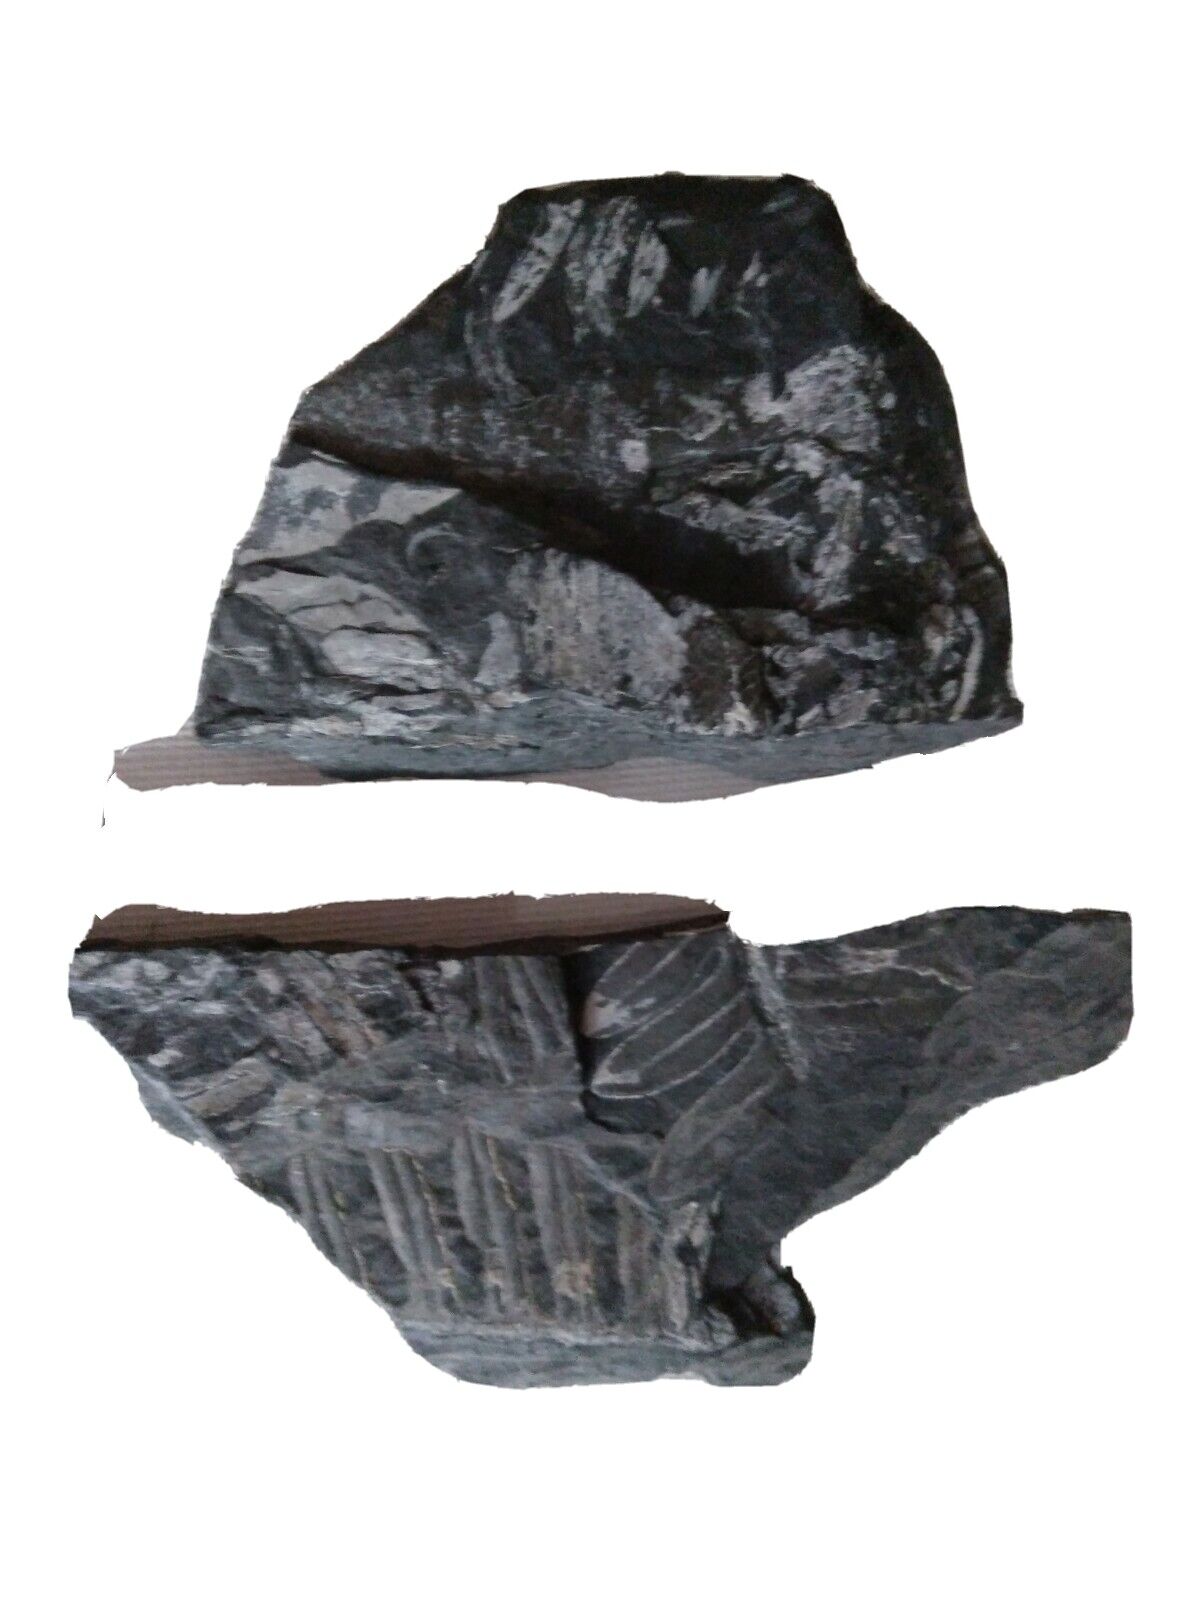 Fossil Rocks dated between 300 to 310 Million yrs OLD carboniferous Period (3)